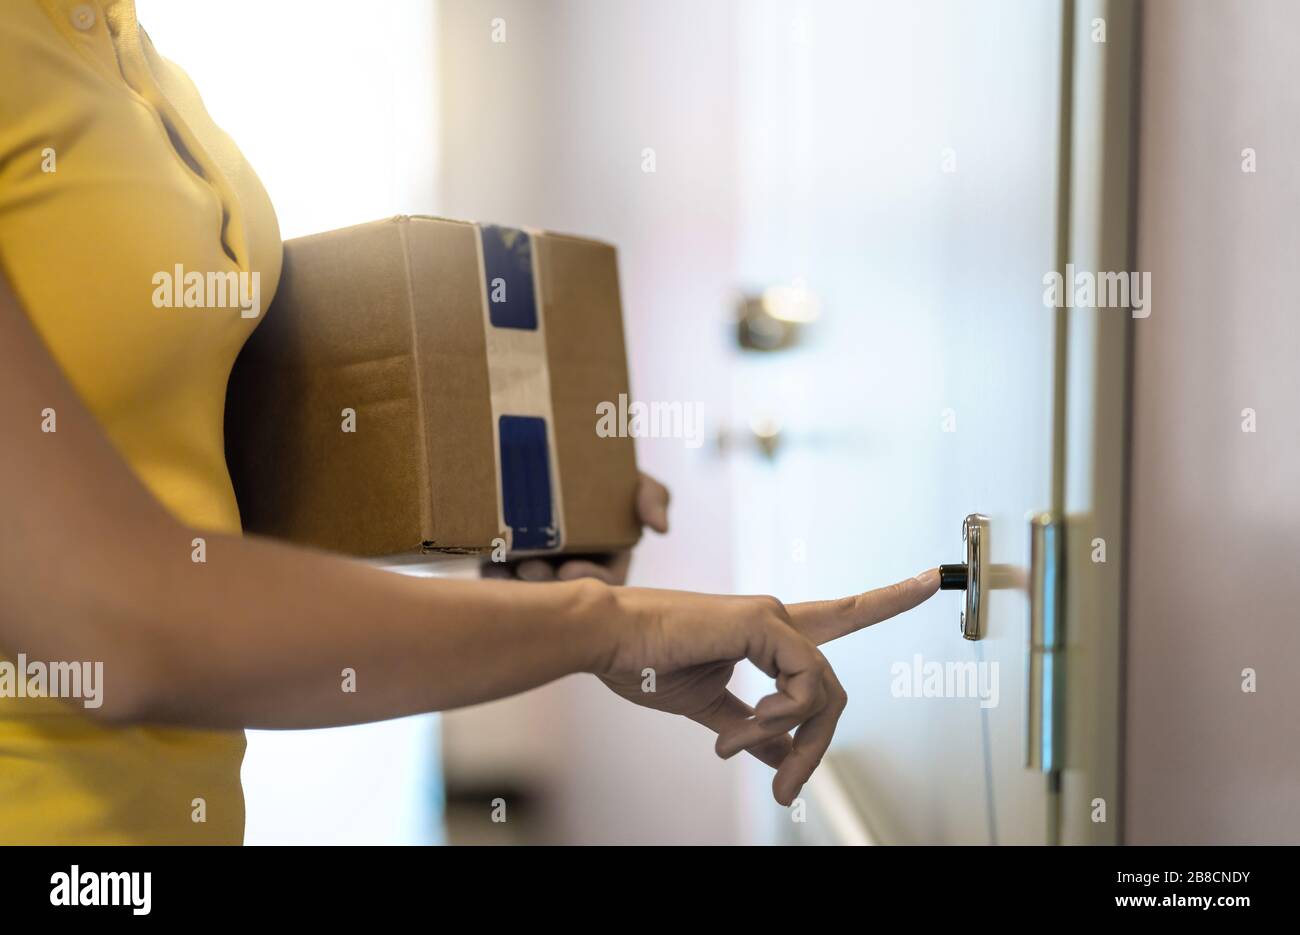 Delivery person delivering package to home door. Shipment service. Woman ringing doorbell. Female courier working and holding carton box in building. Stock Photo